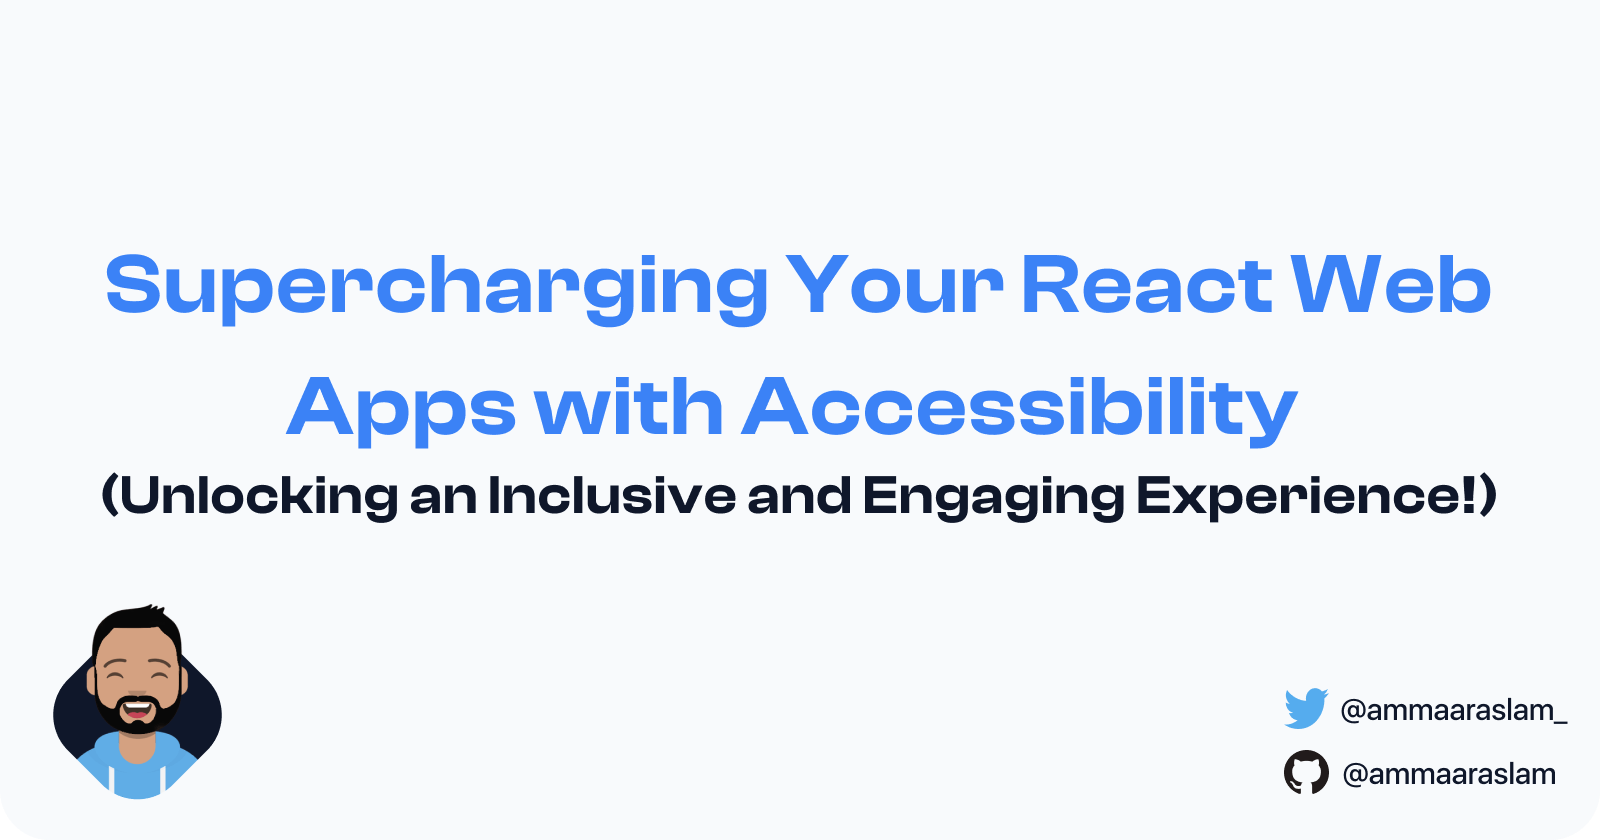 Supercharging Your React Web Apps with Accessibility